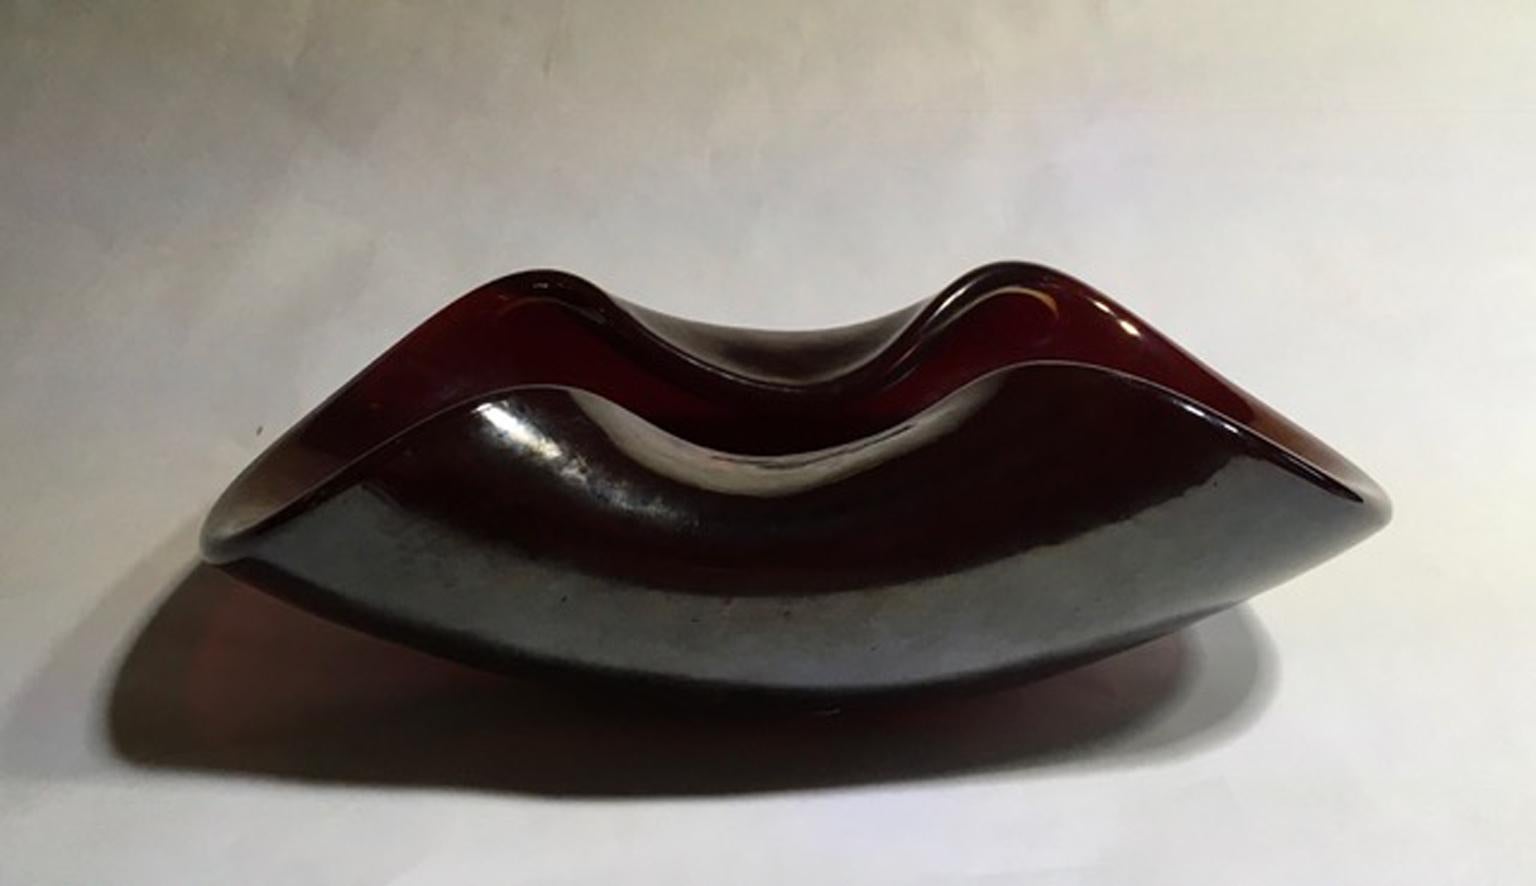 1960 Italy Mid-Century modern iridescent rubin color blown paste glass bowl

With certificate of authenticity